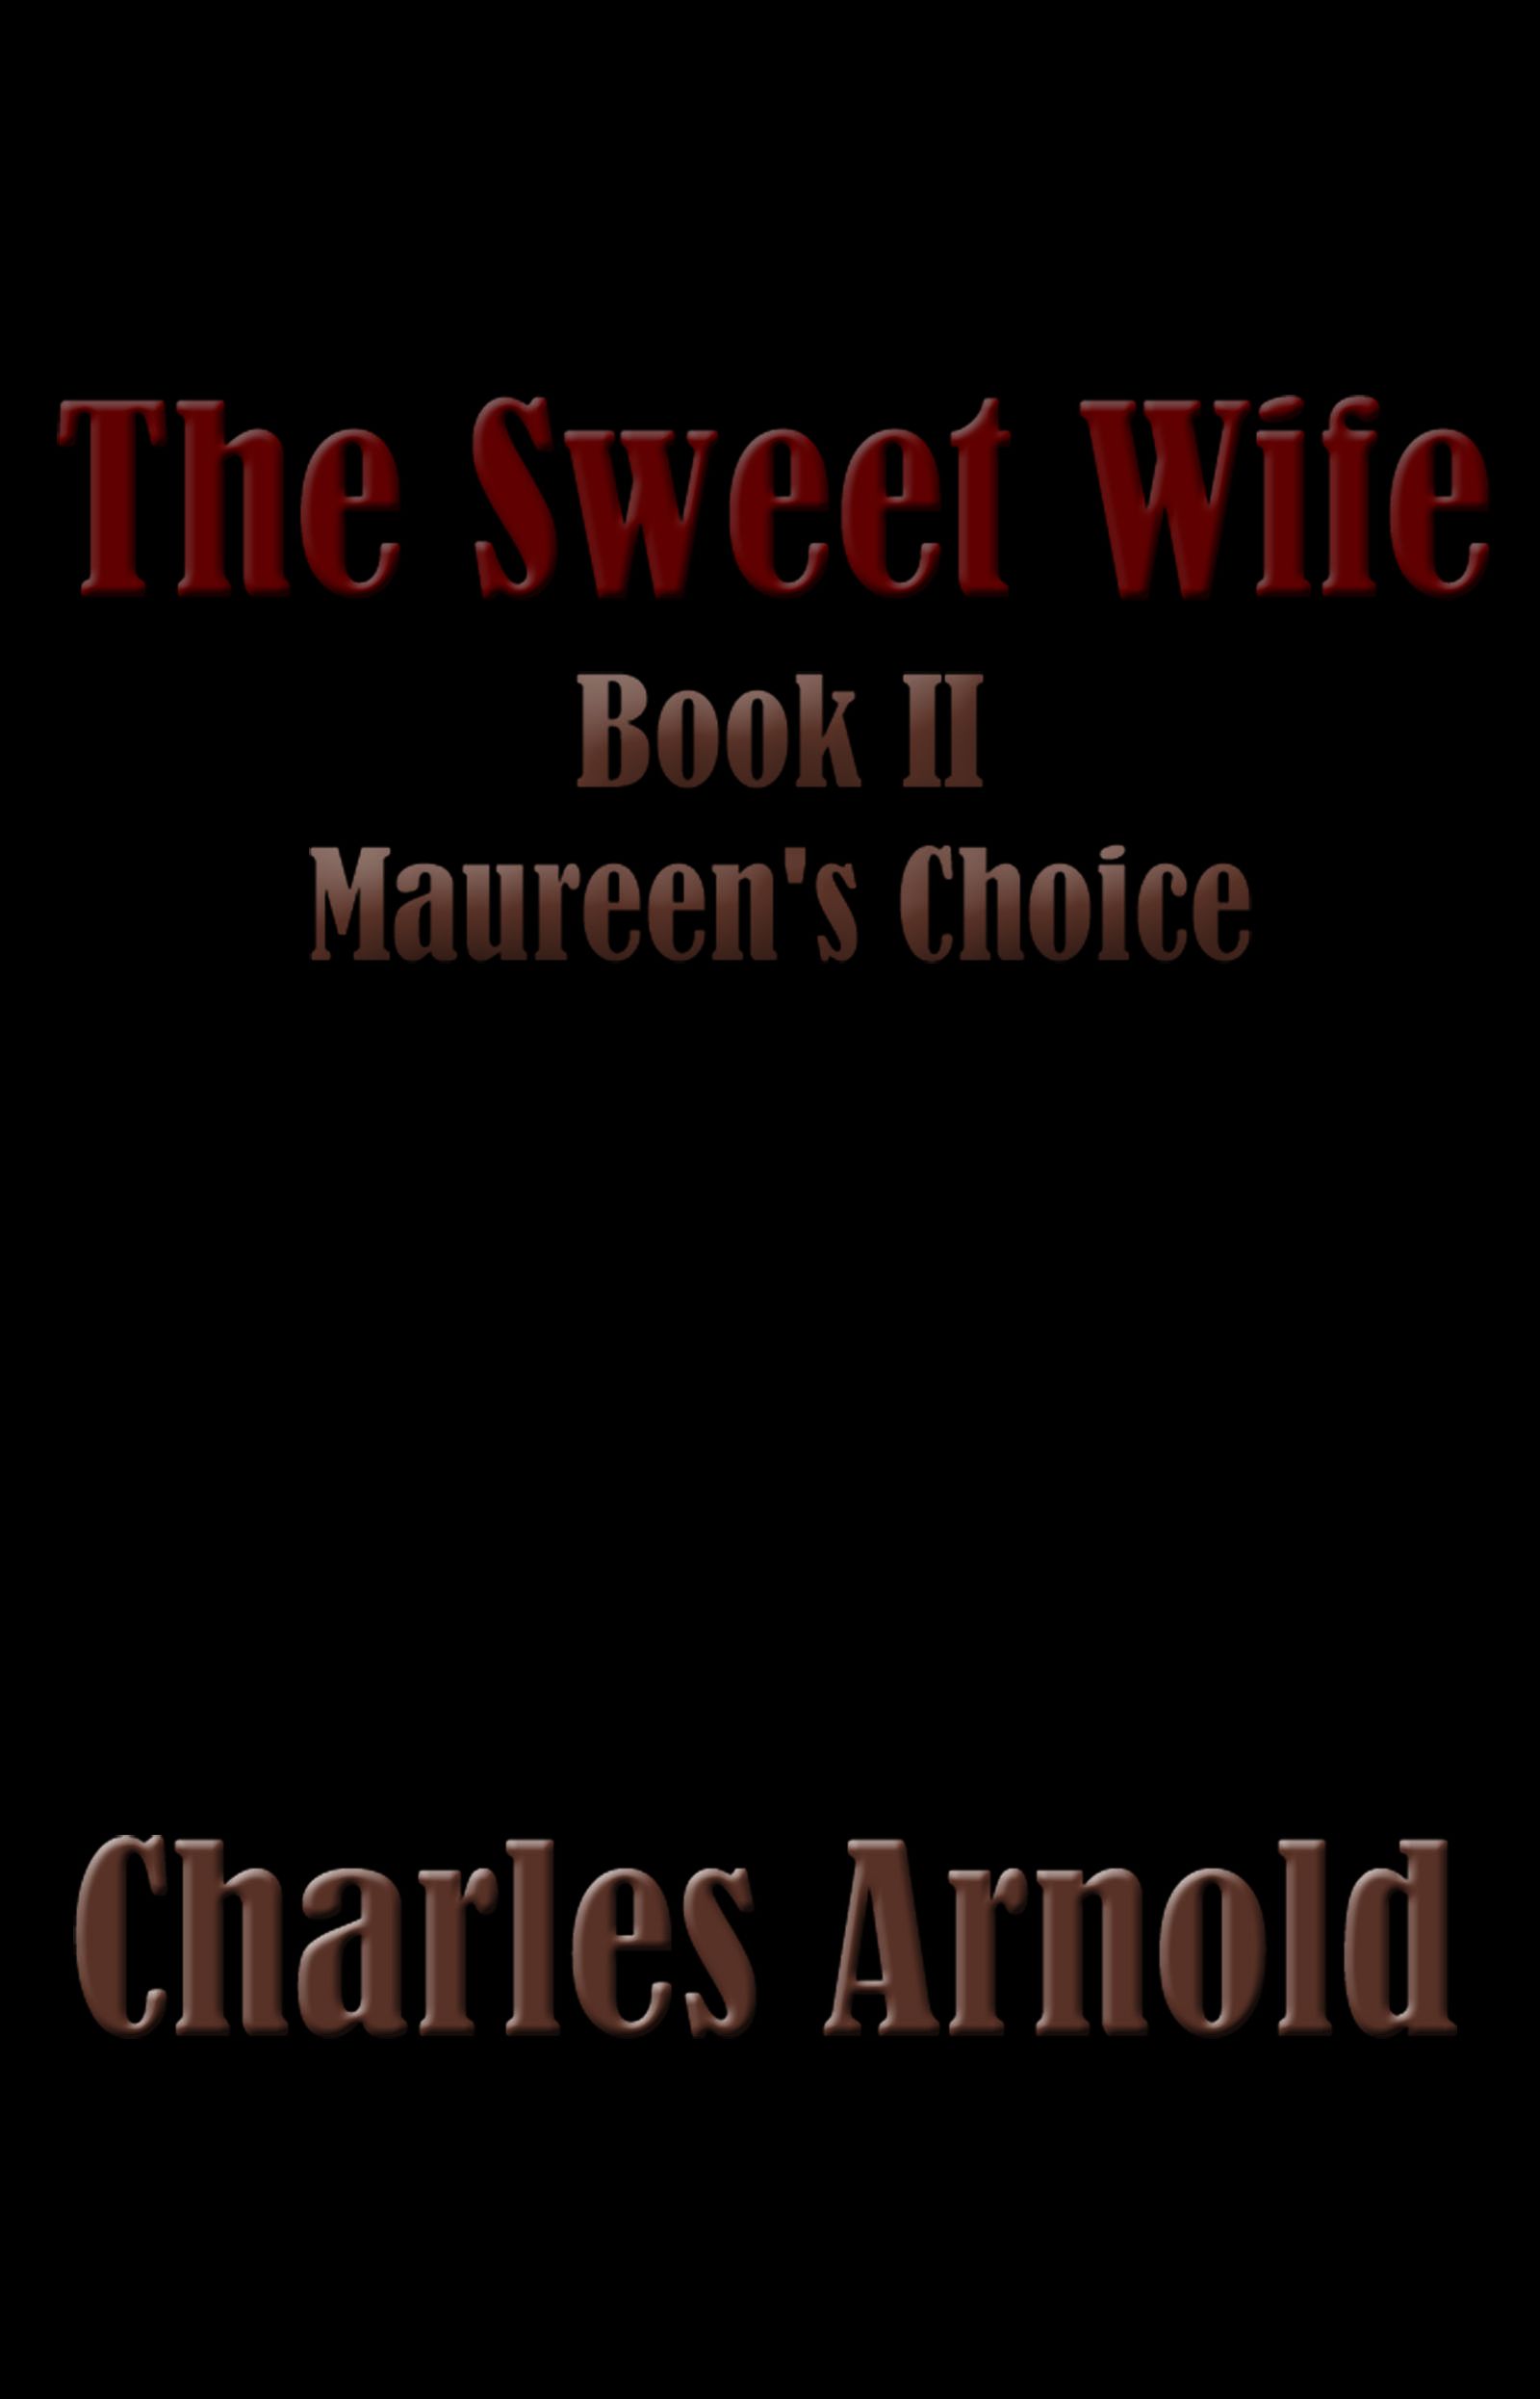 Maureen's Choice by Charles Arnold